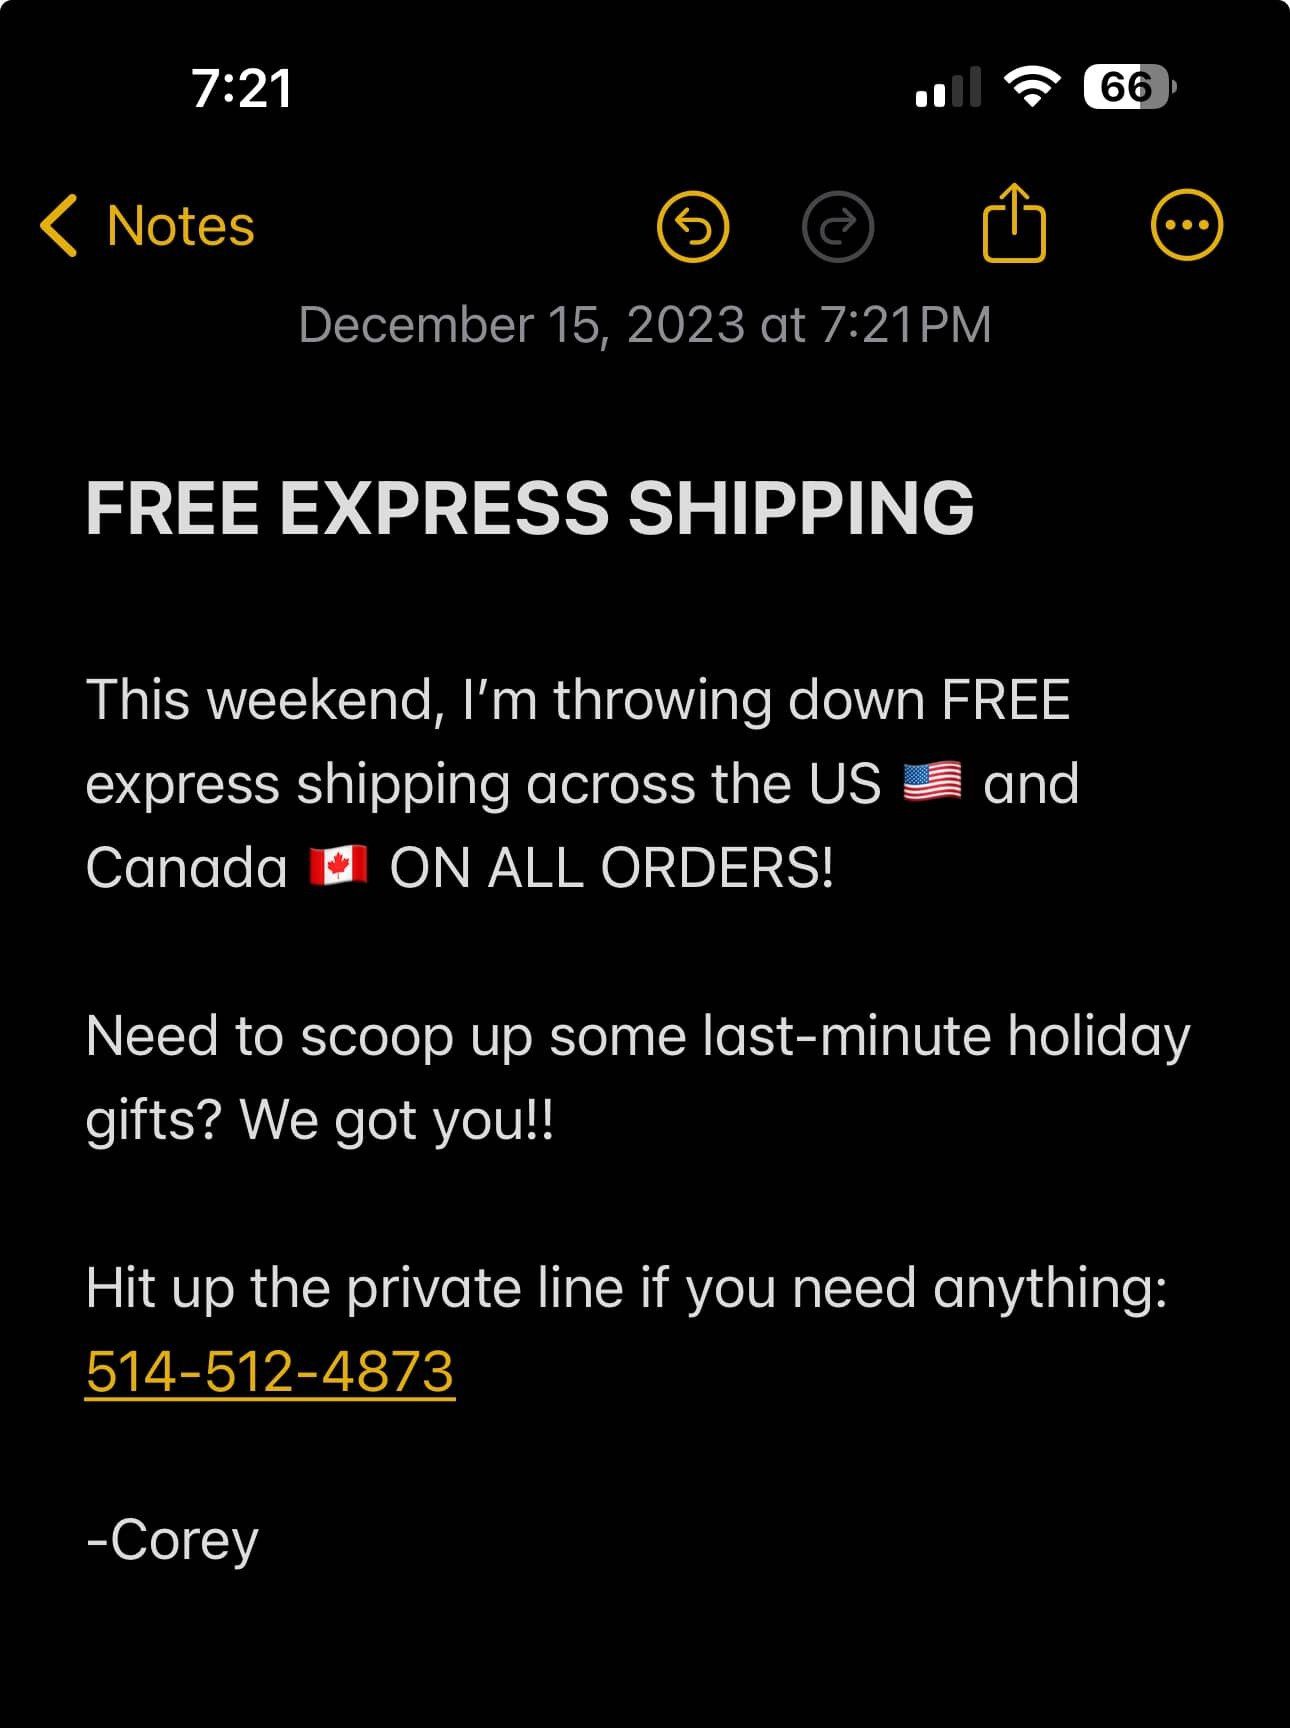 FREE SHIPPING ALL WEEKEND!